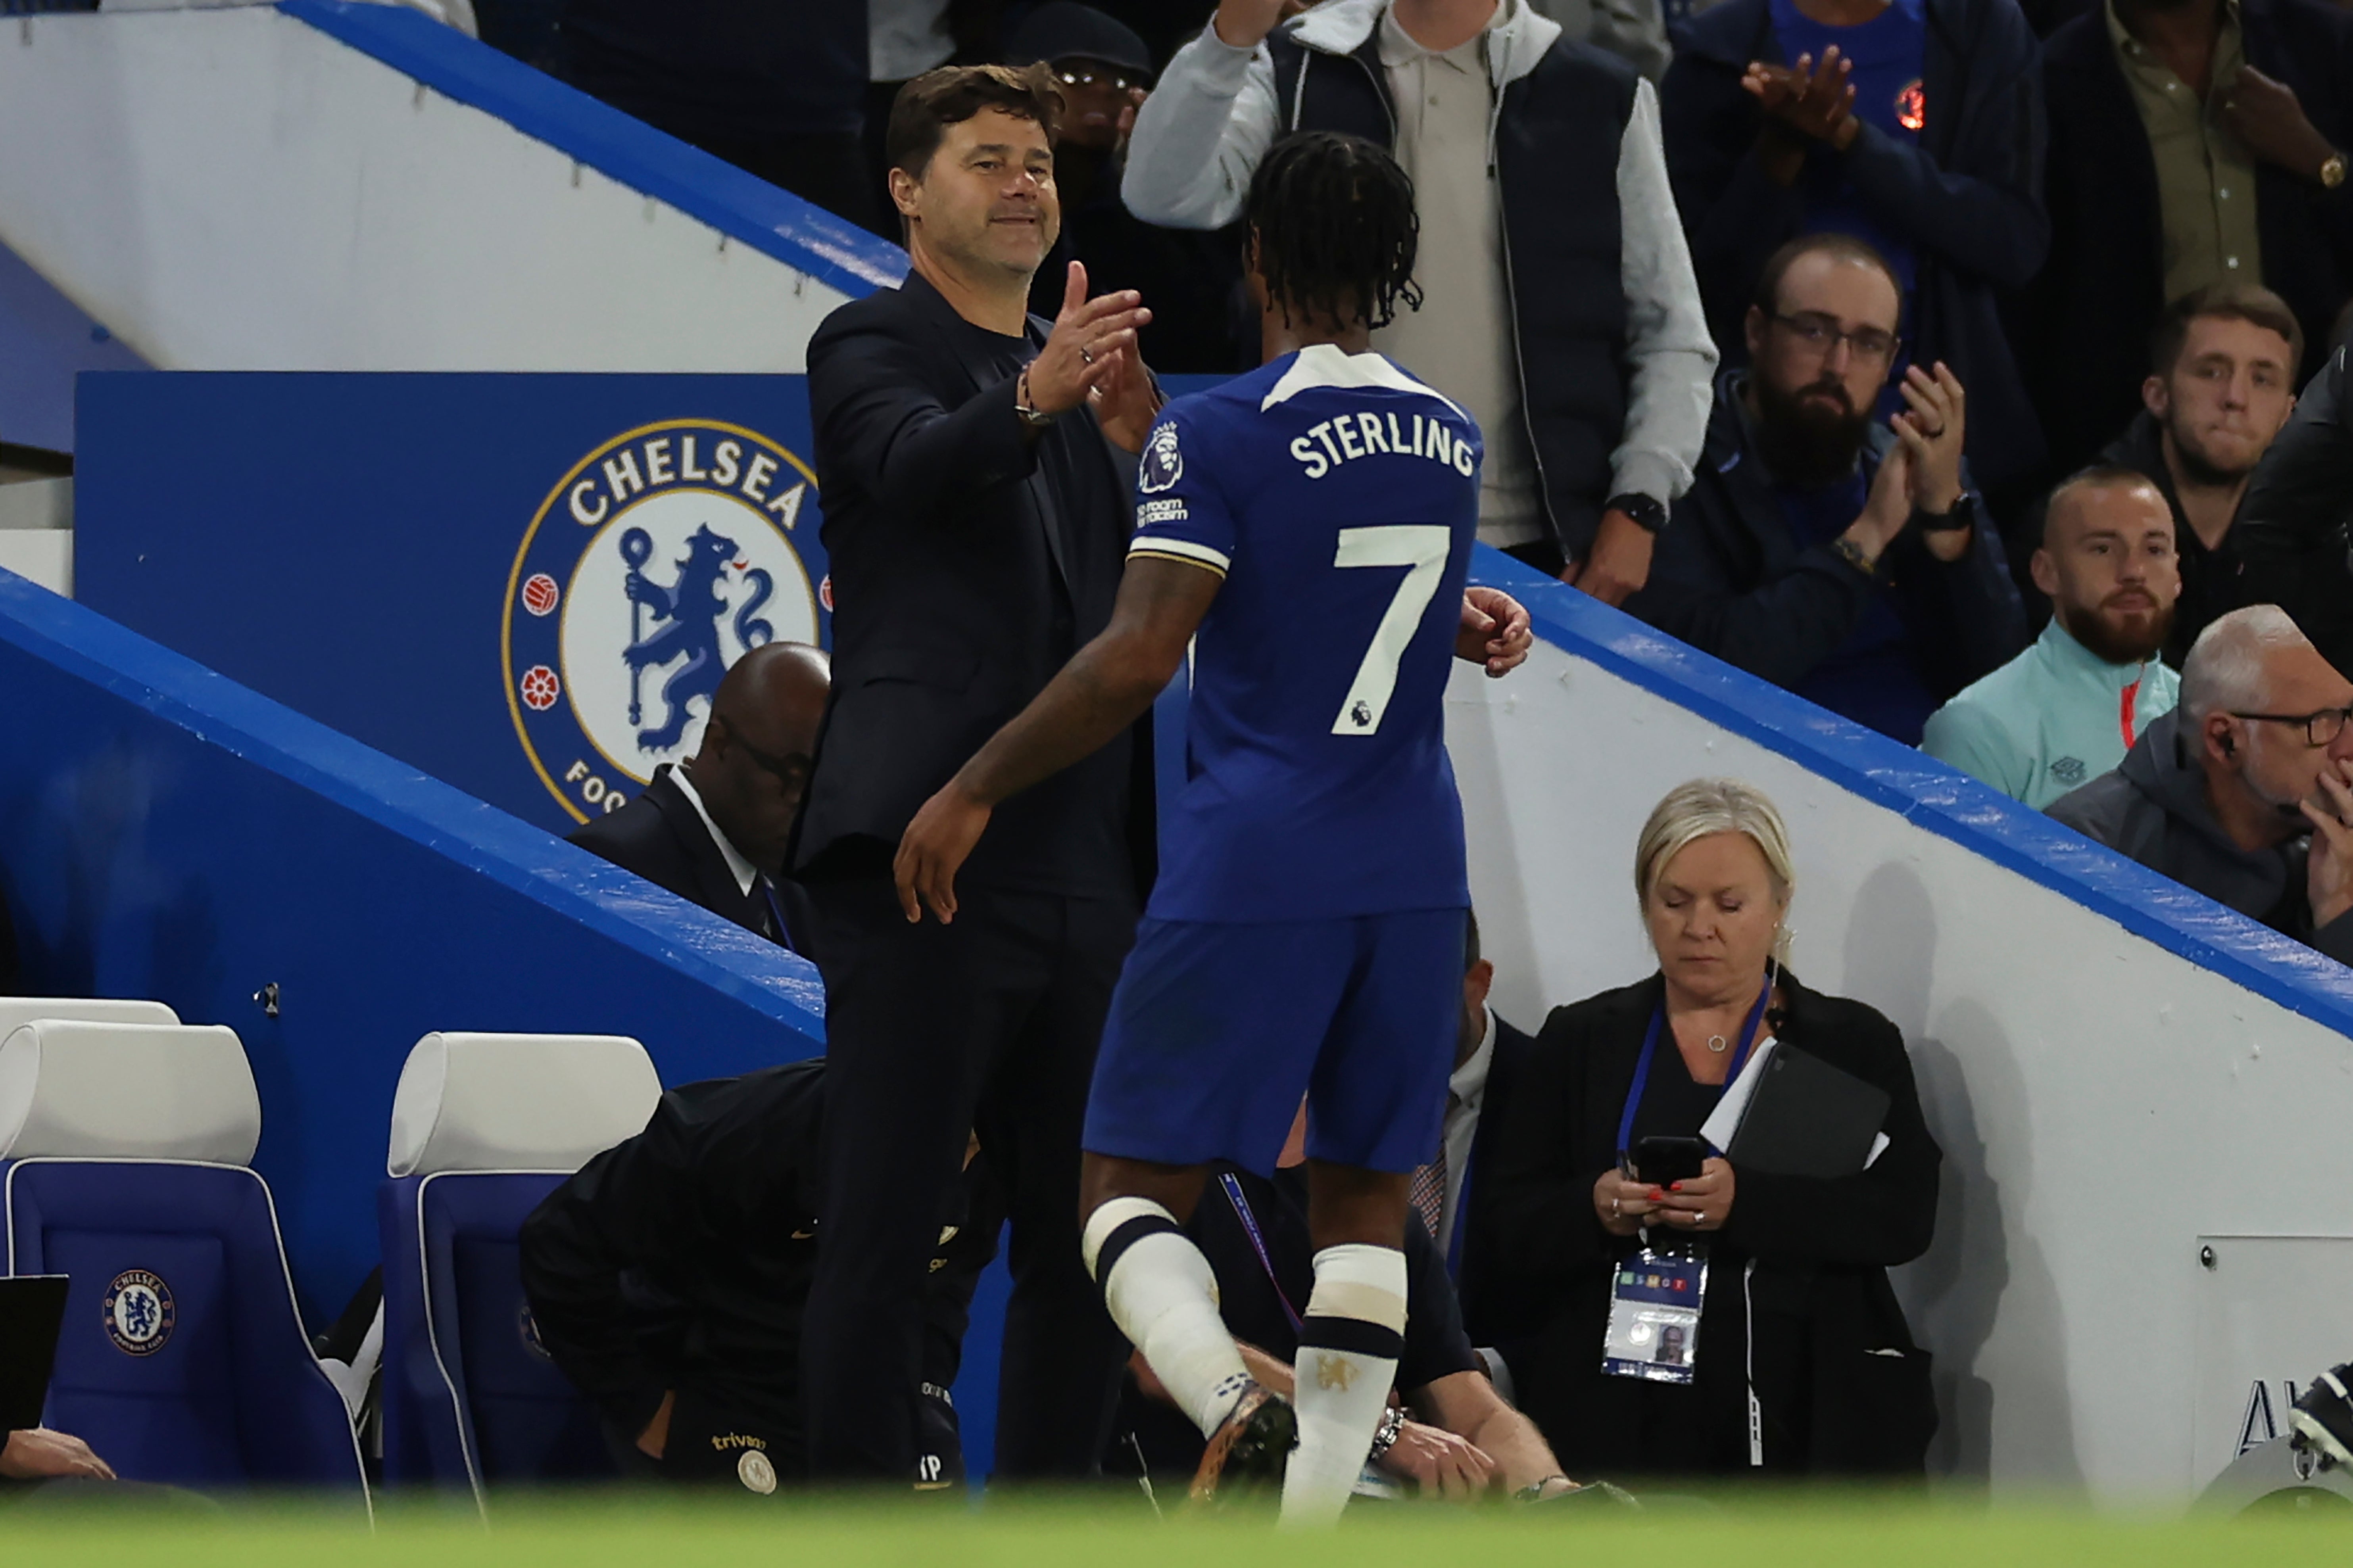 Mauricio Pochettino gives Sterling a hug after securing Chelsea’s first win of the season